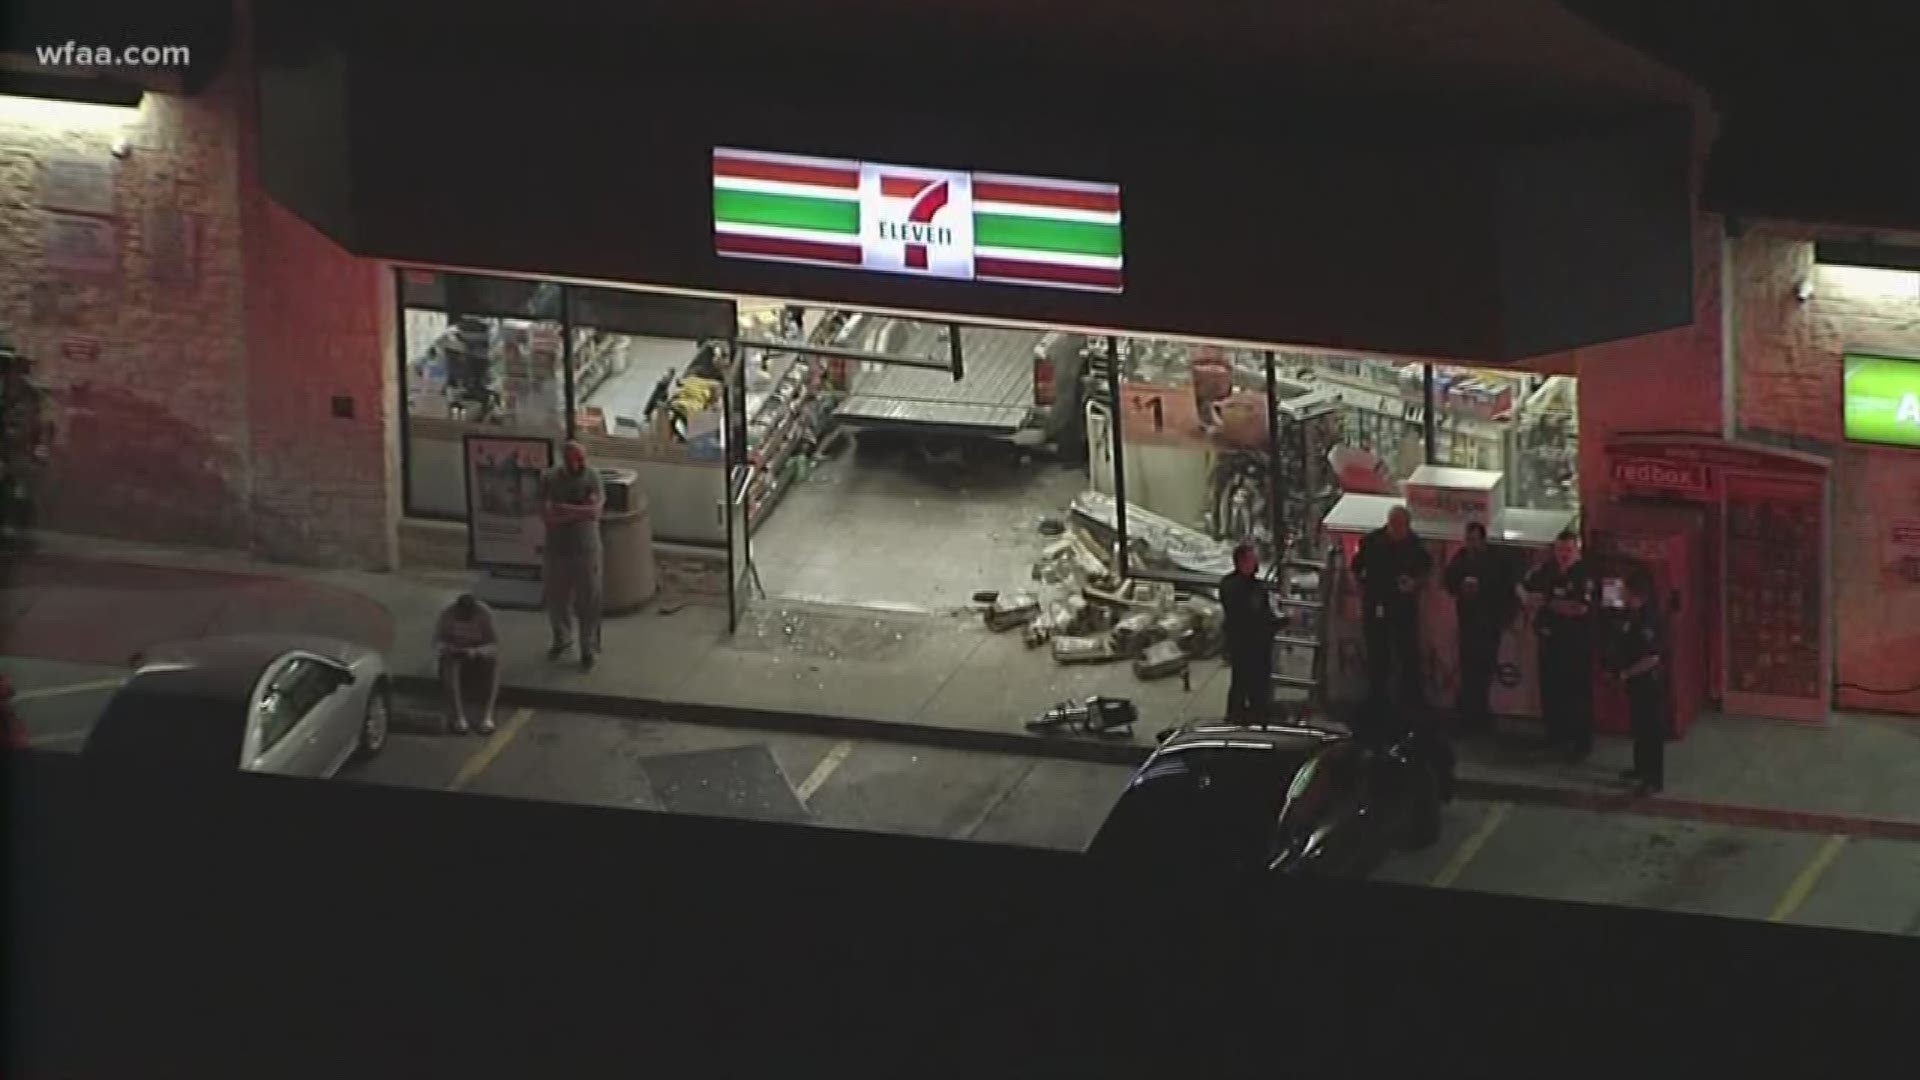 Vehicle crashes in 7-Eleven gas station in Murphy